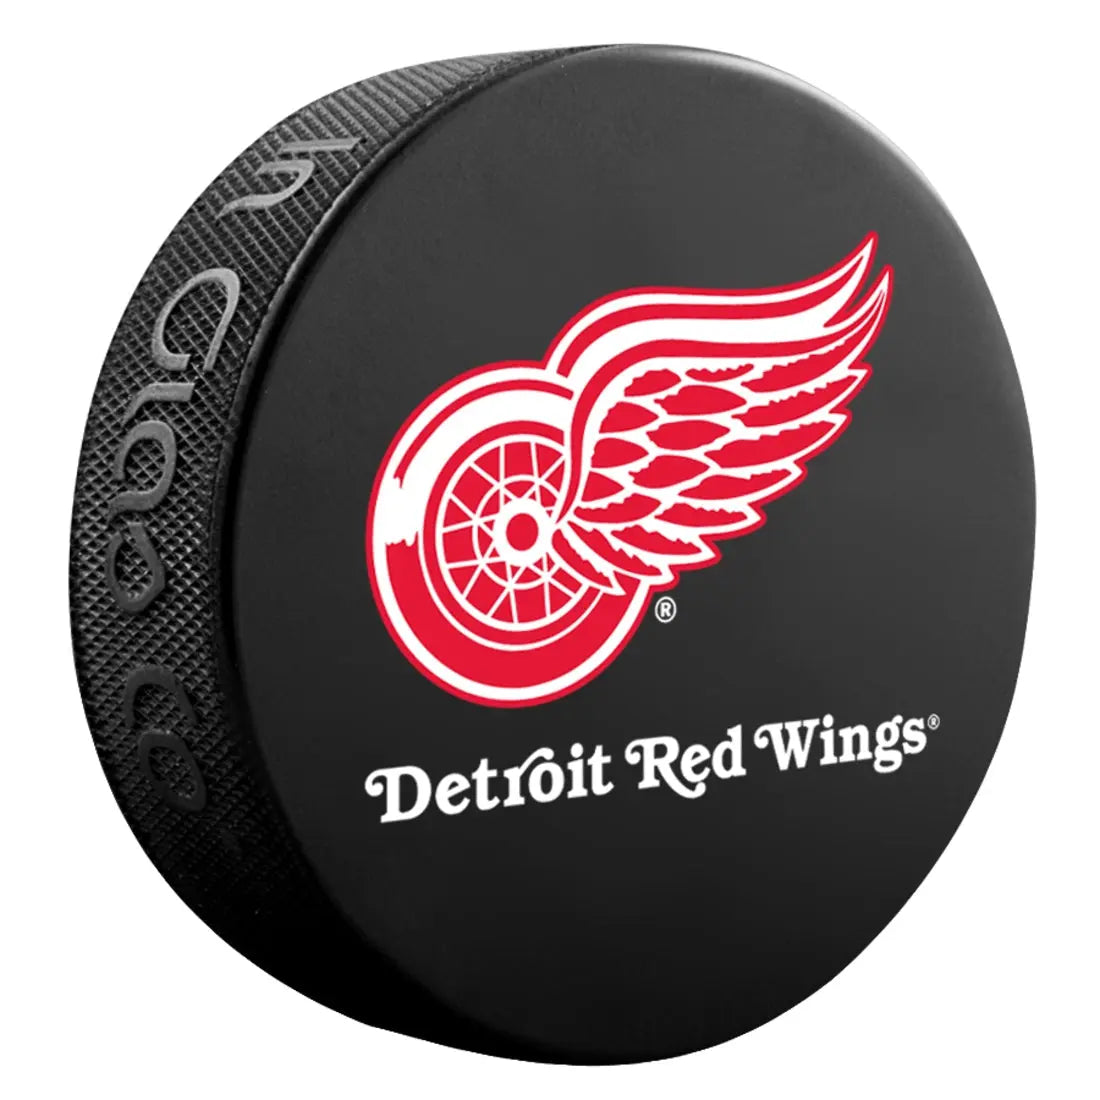 Detroit Red Wings Embroidered Iron on Patch. 